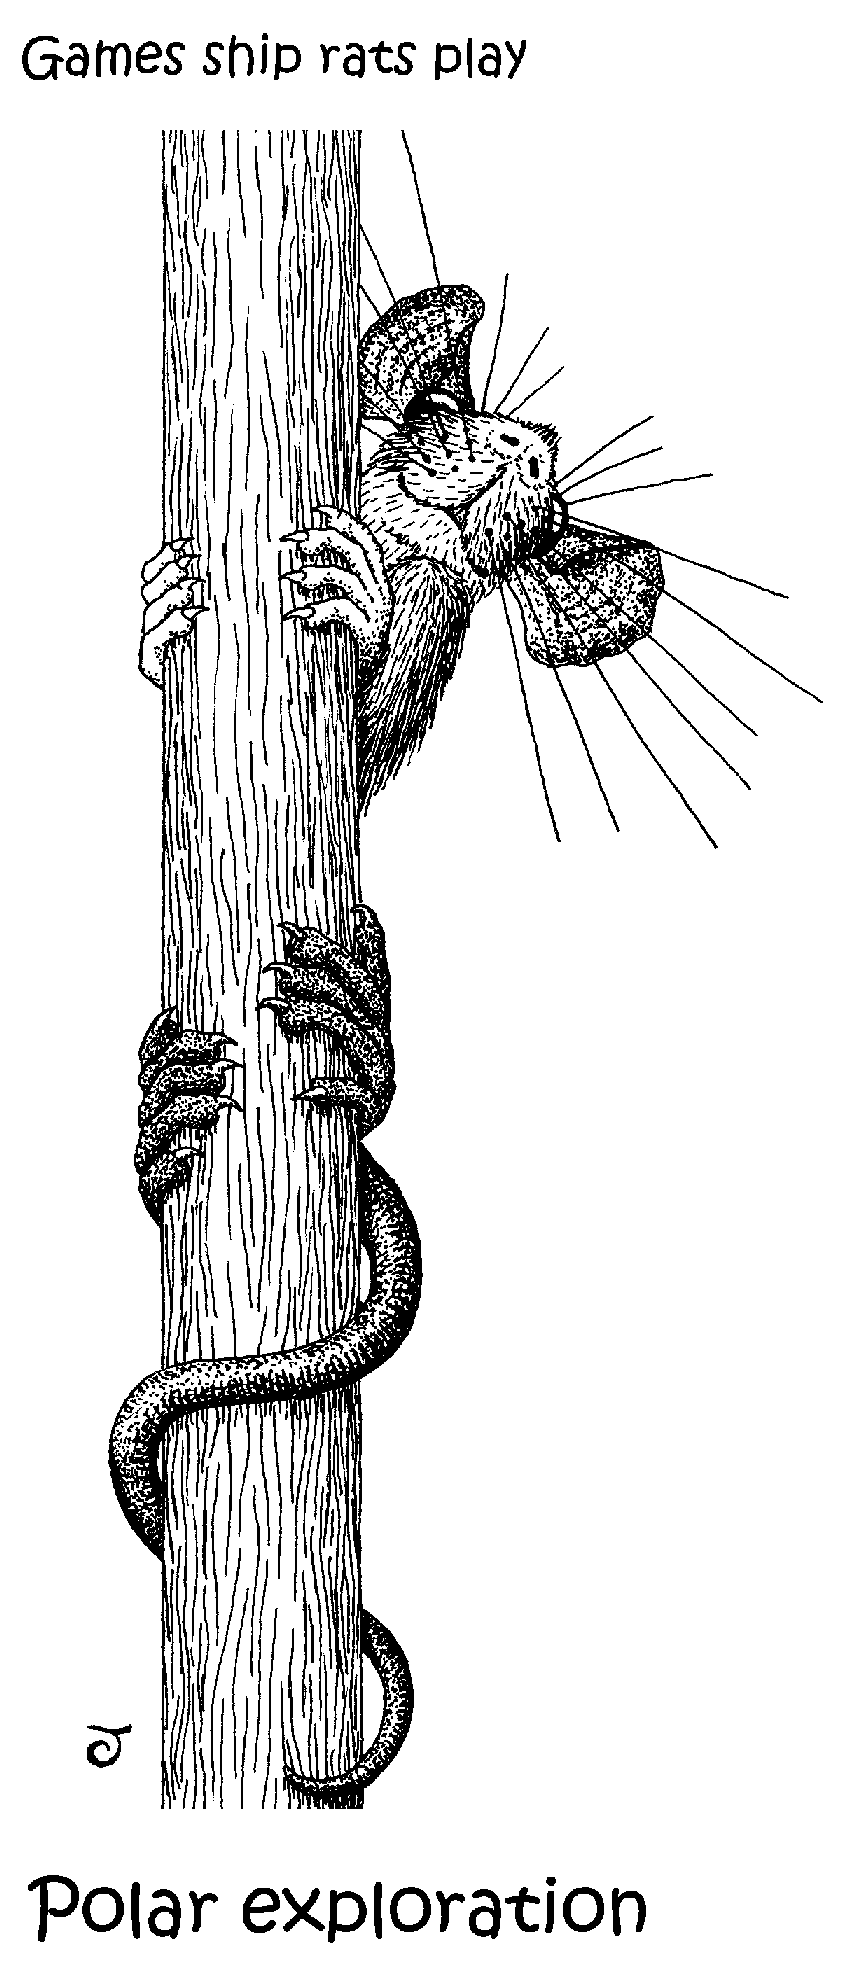 Caricature of ship rat climbing a broomstick-handle and peering round it